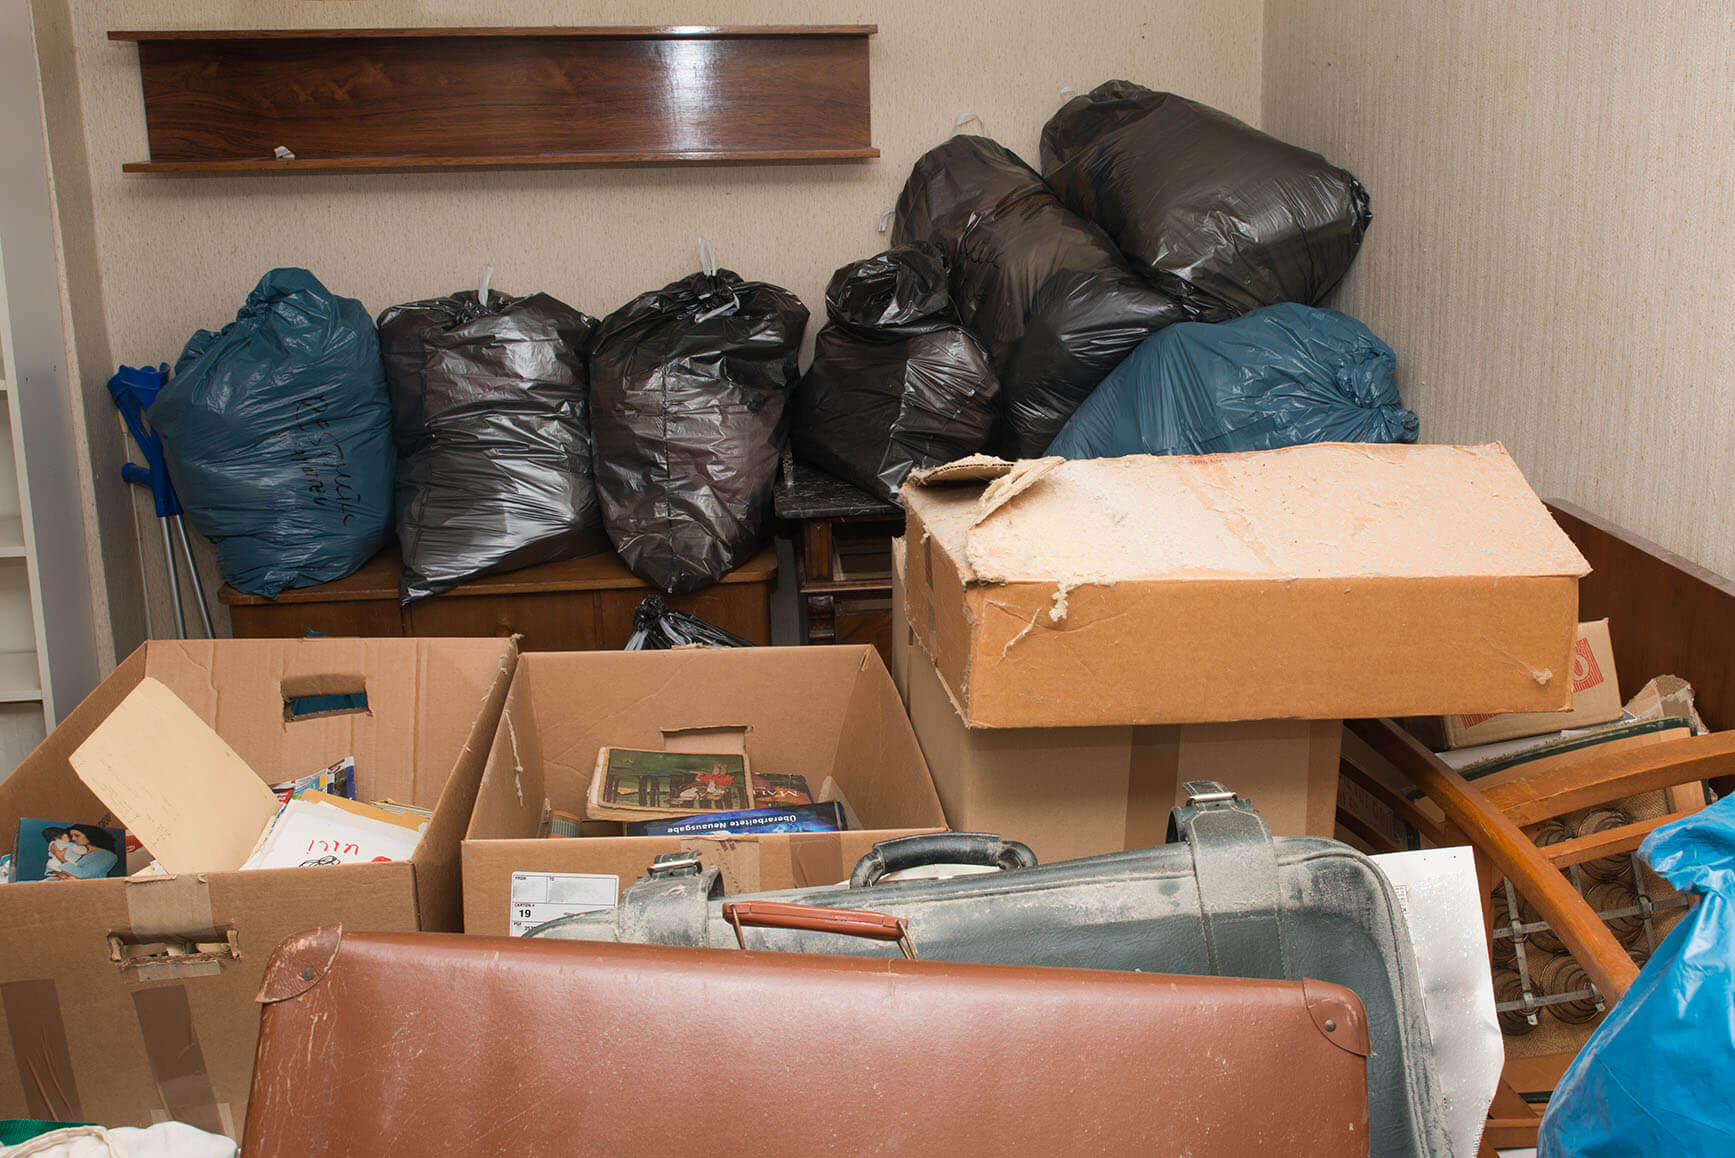 trustworthy provider of house clearance in nottingham